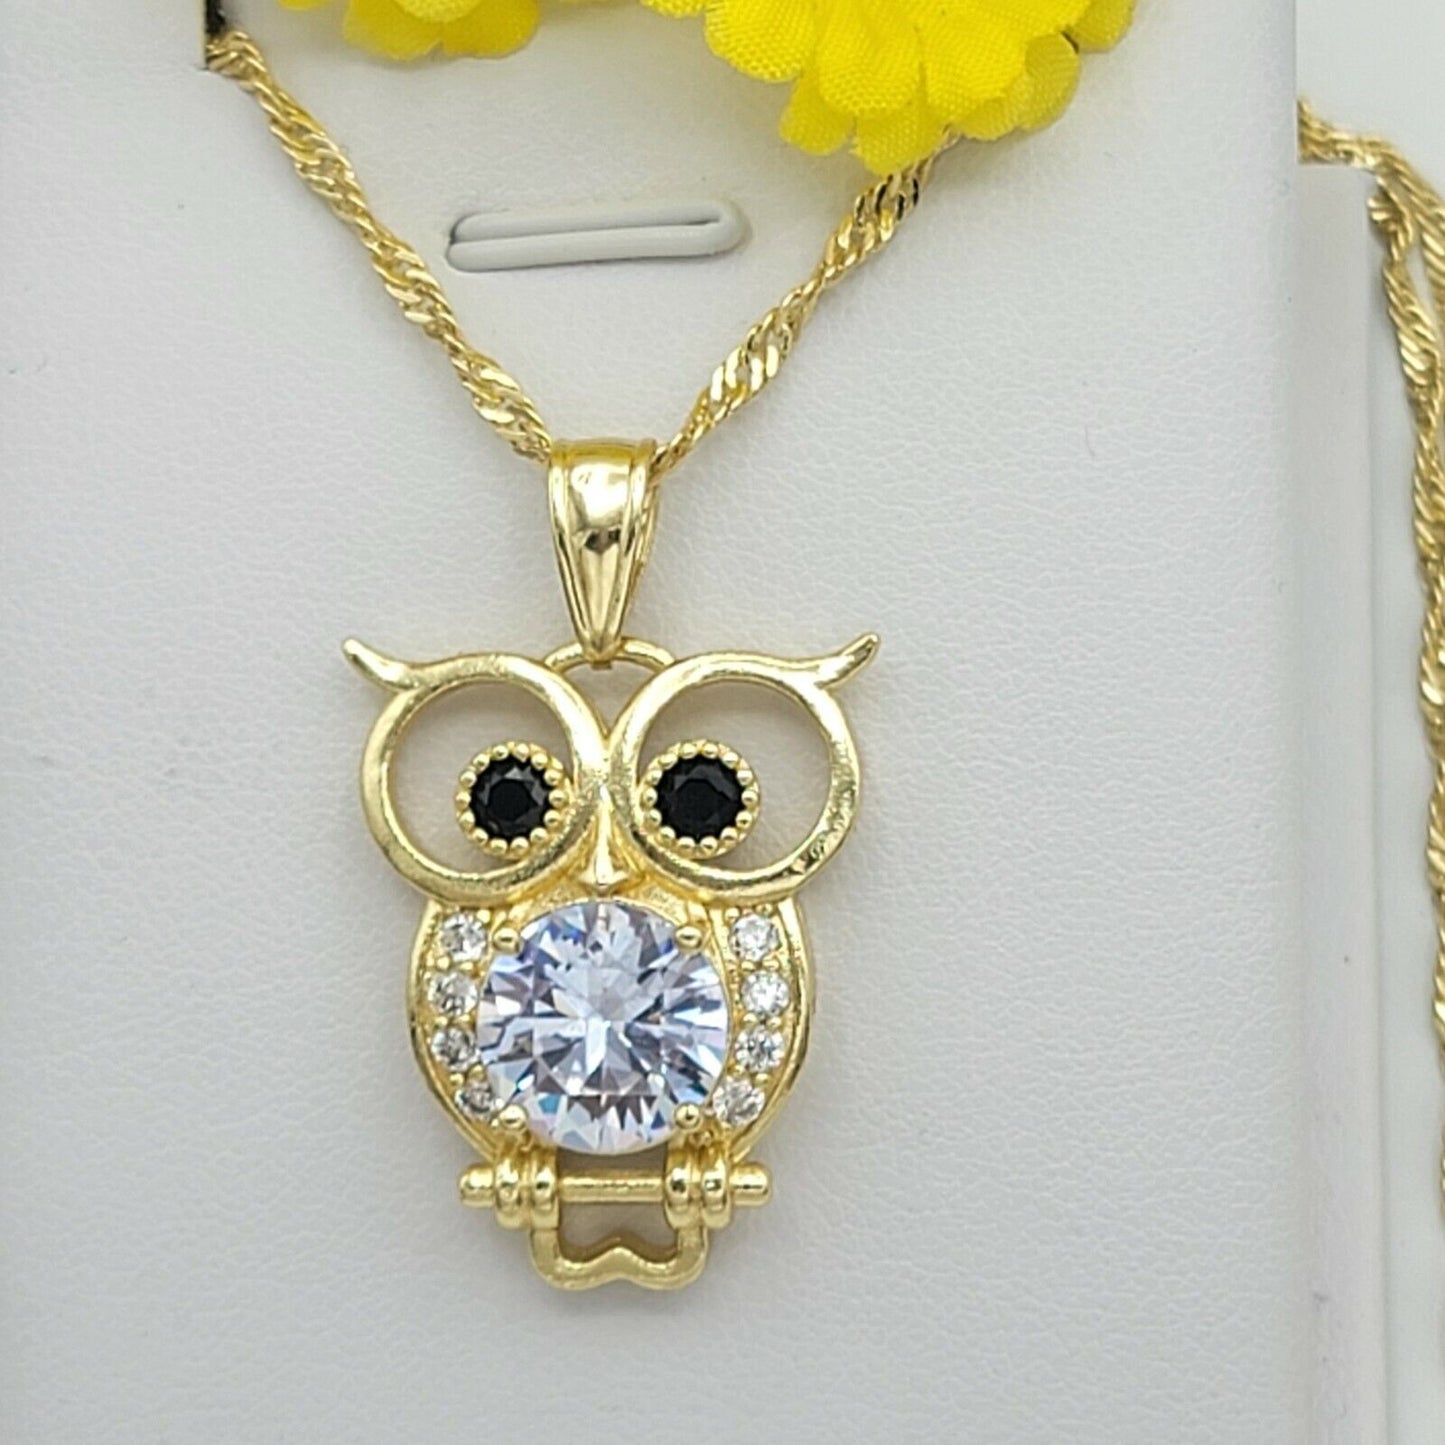 Necklaces - 14k Gold Plated. CZ Owl Pendant & Chain.